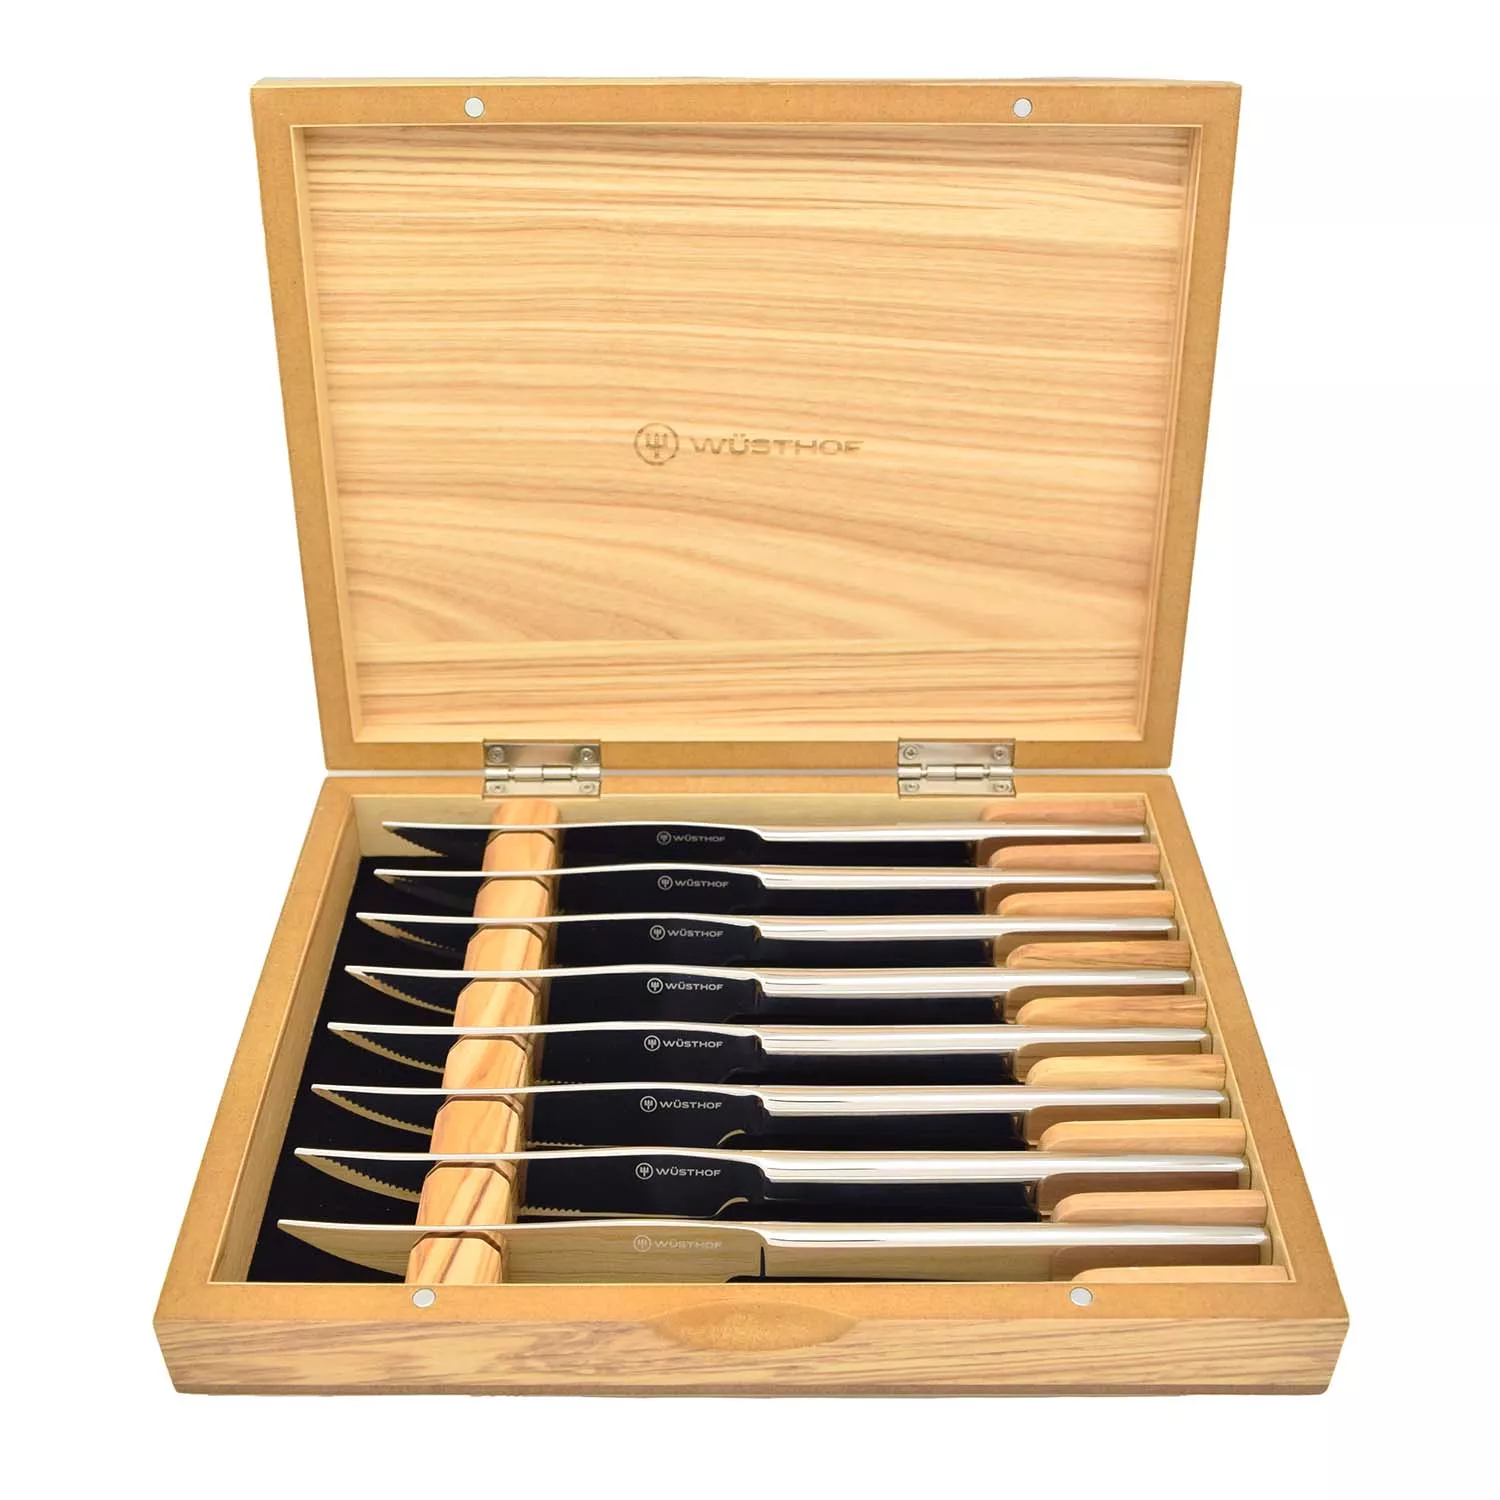 Photos - Knife Set Wusthof Wsthof Stainless Steak  in Olivewood Chest 1069510803 